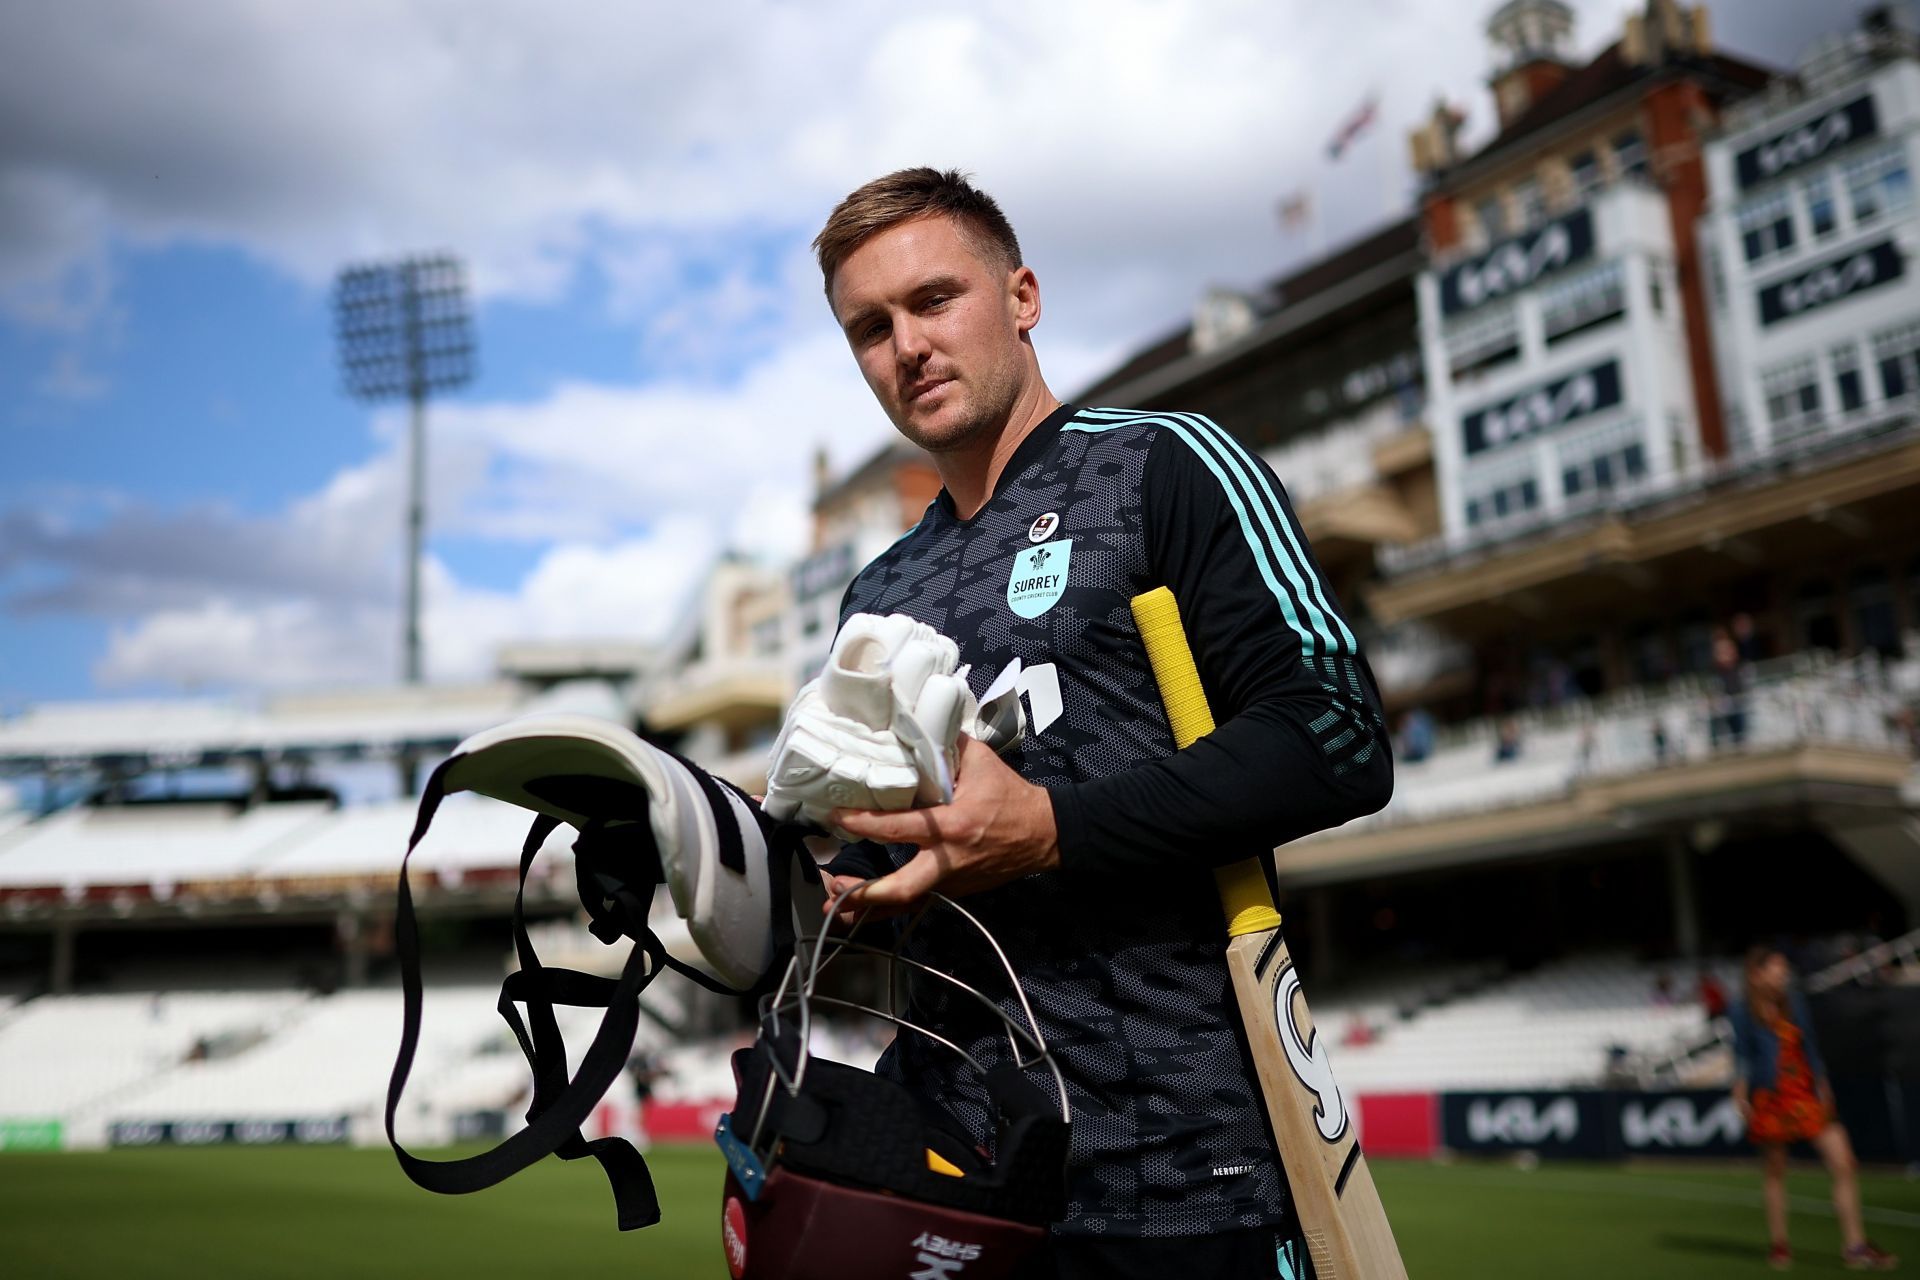 Jason Roy is an experienced player having played T20 cricket around the world